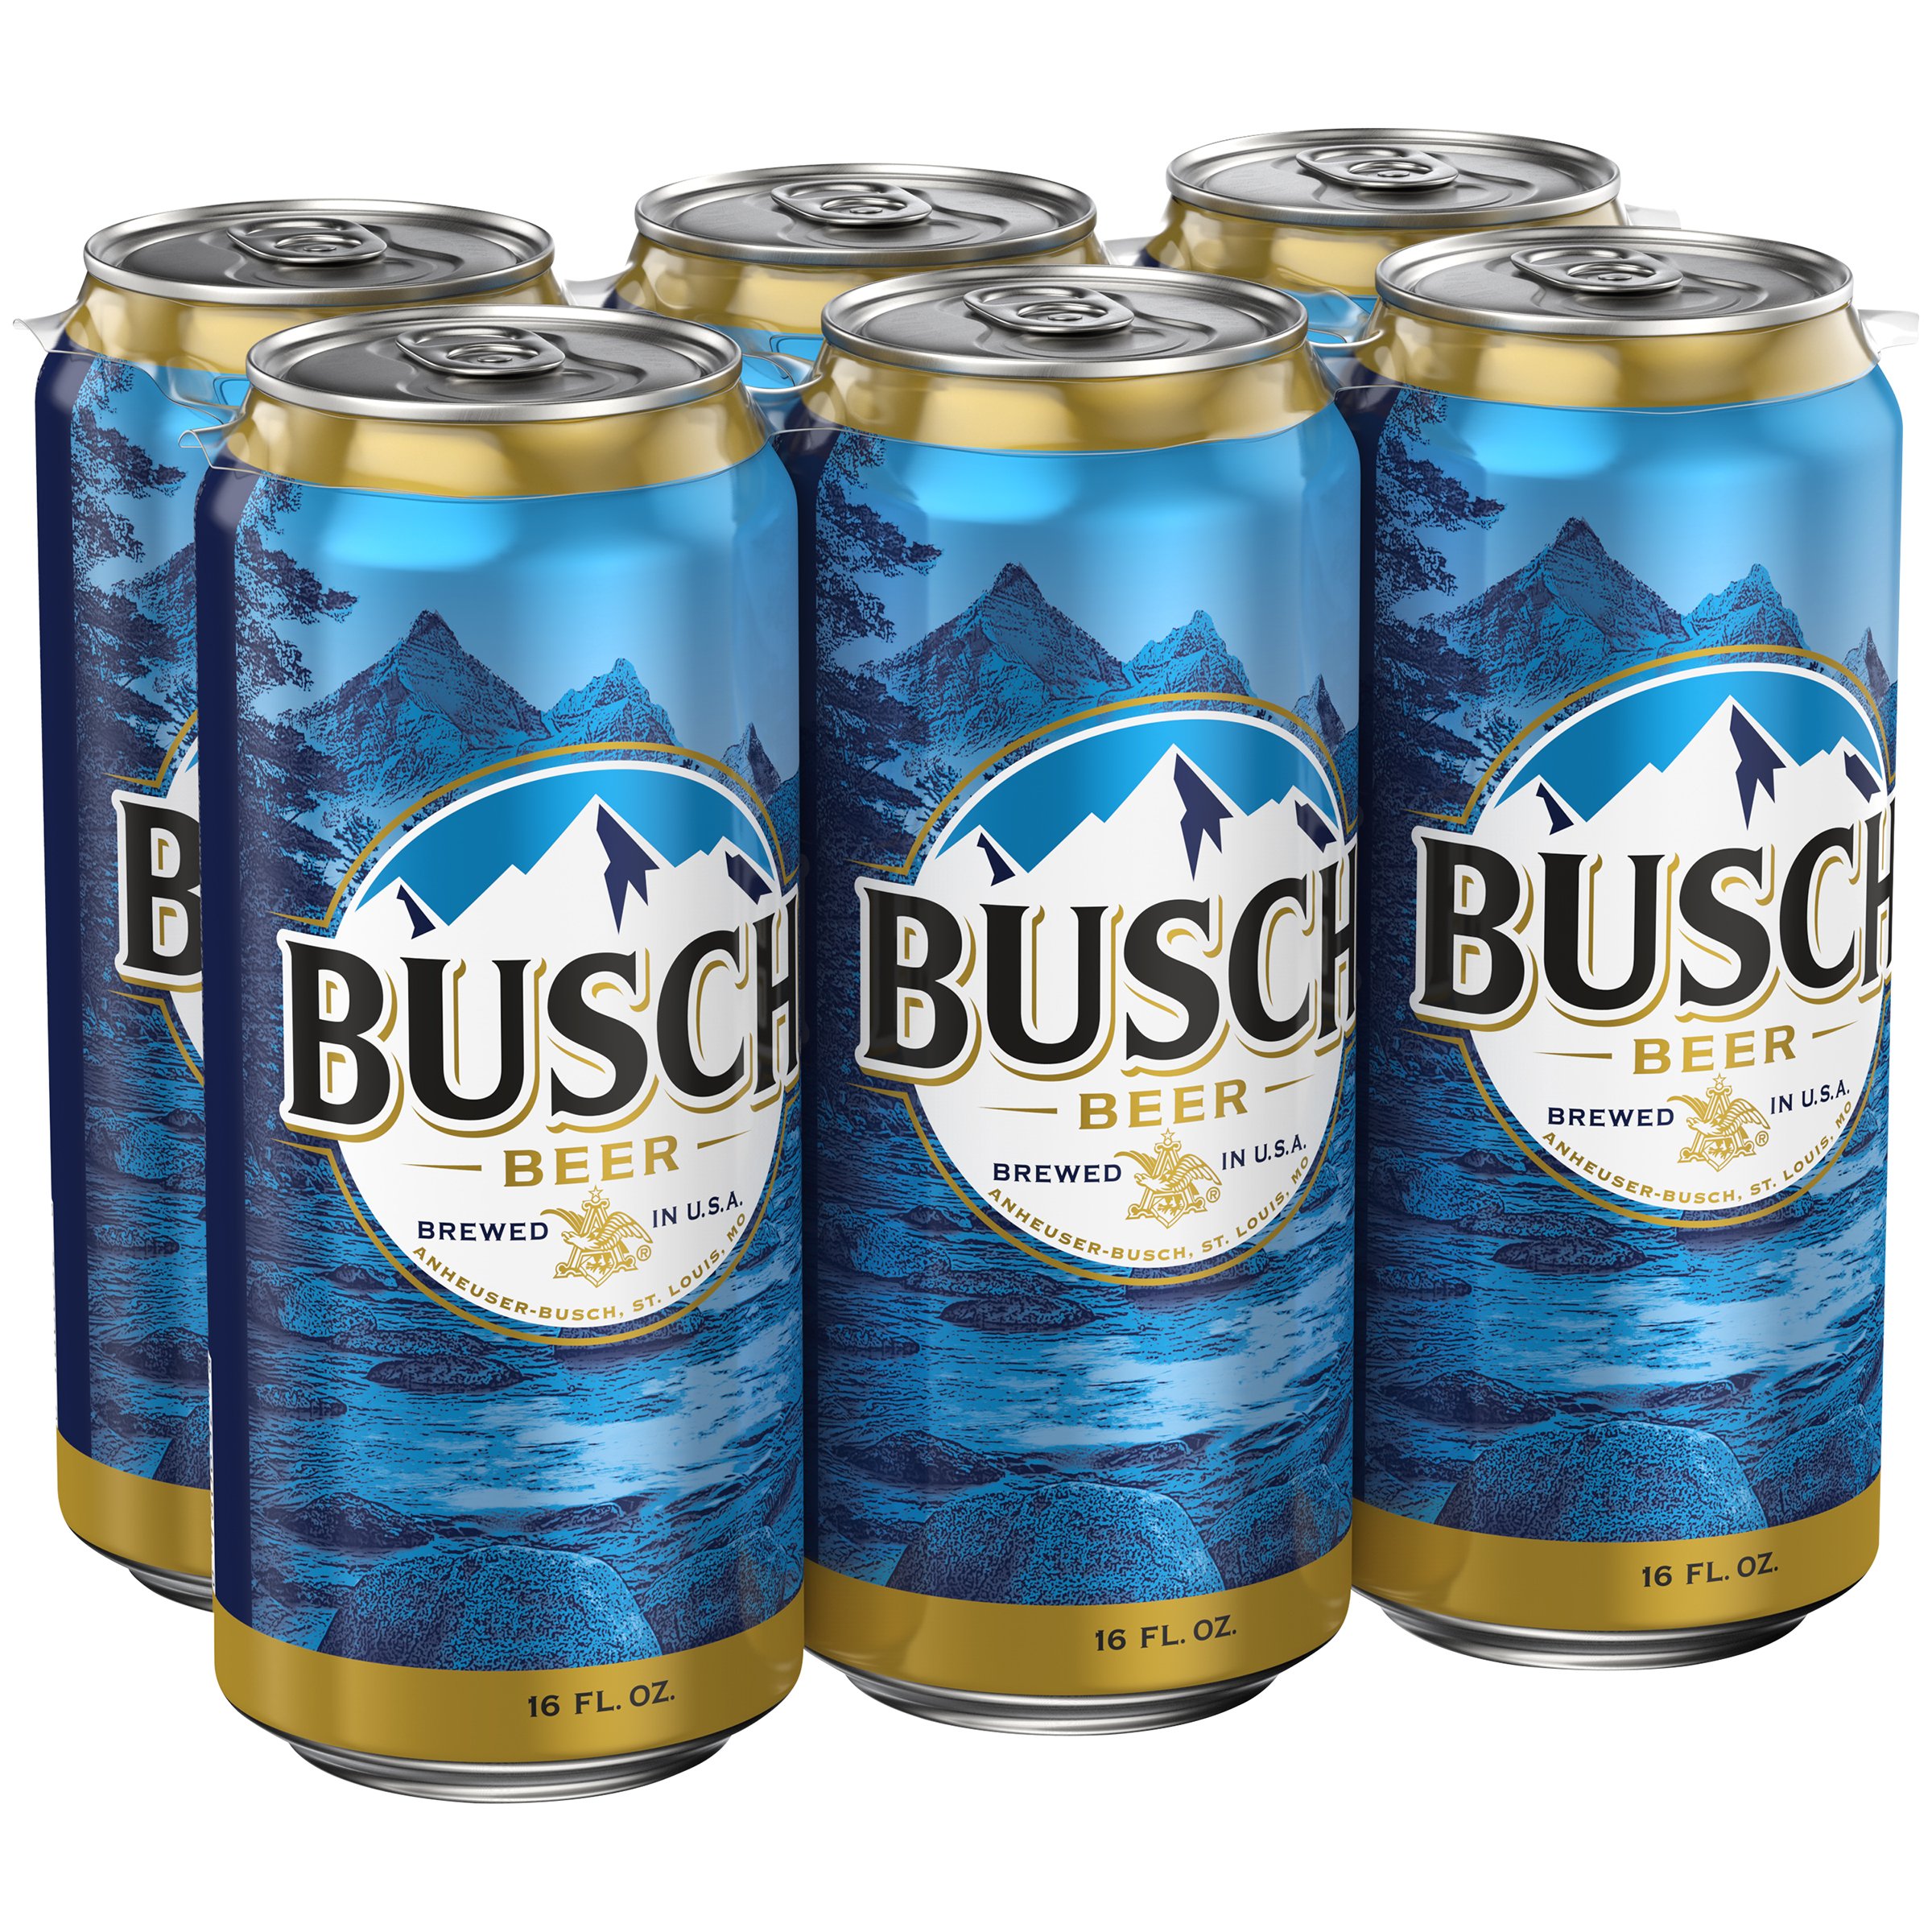 Busch Beer 6 pk Cans - Shop Beer at H-E-B